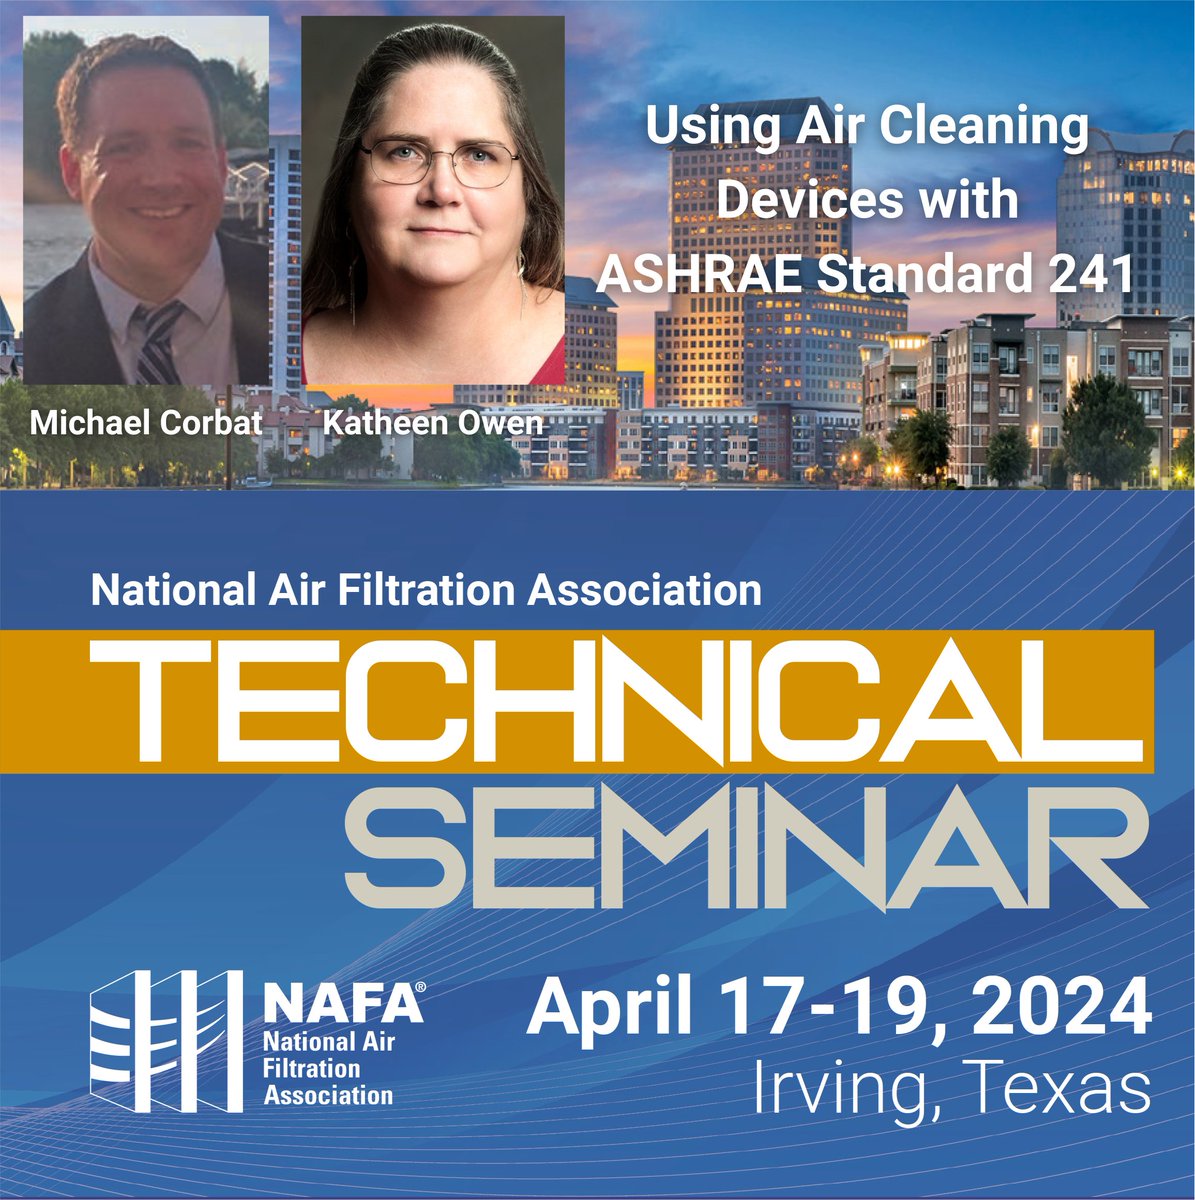 This talk introduces Std 241 with emphasis on how air cleaners can be used and what requirements are made to allow them to be used. nafahq.org/2024-technical…

#nafatech #airfilters #airfiltration #cleanairmatters